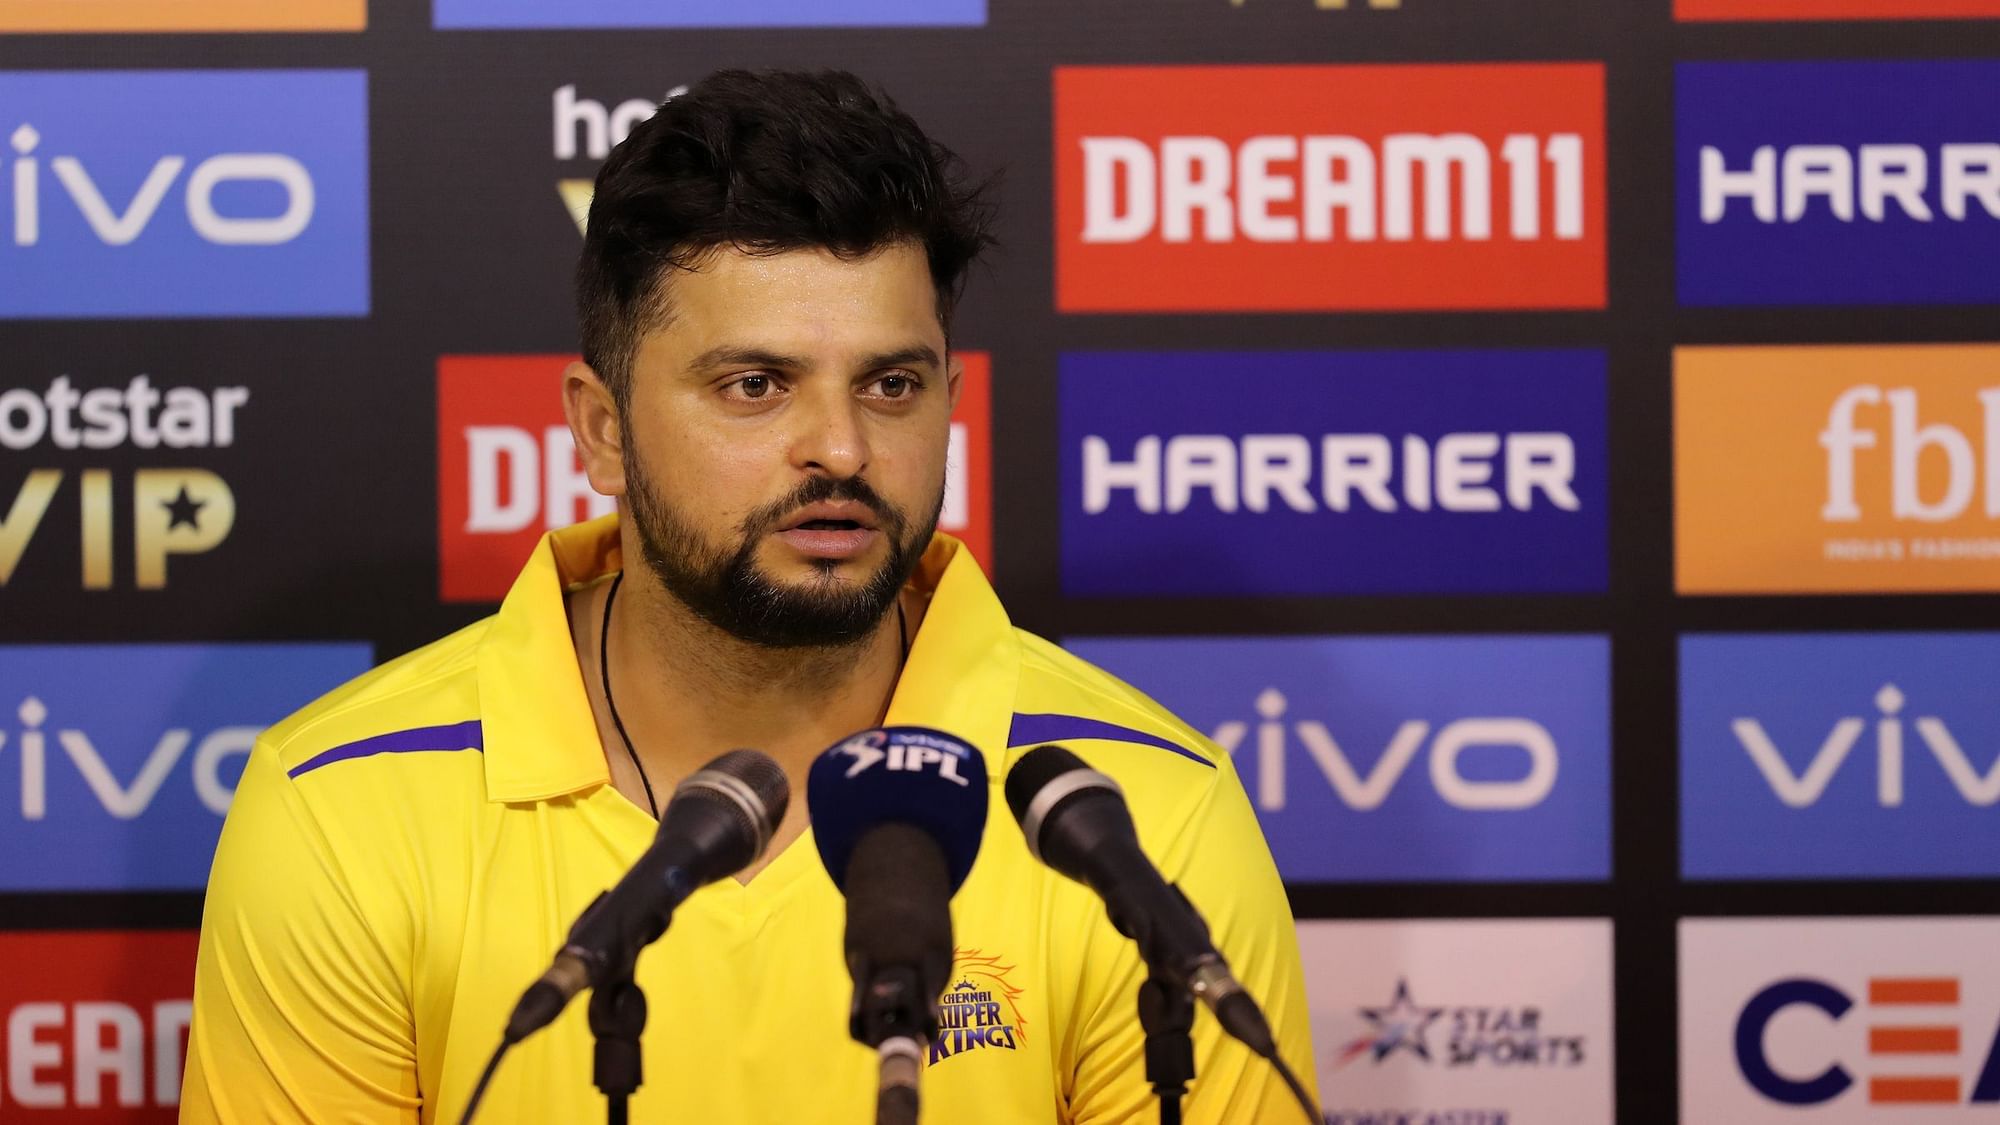 CSK removes Raina’s name from their official website.